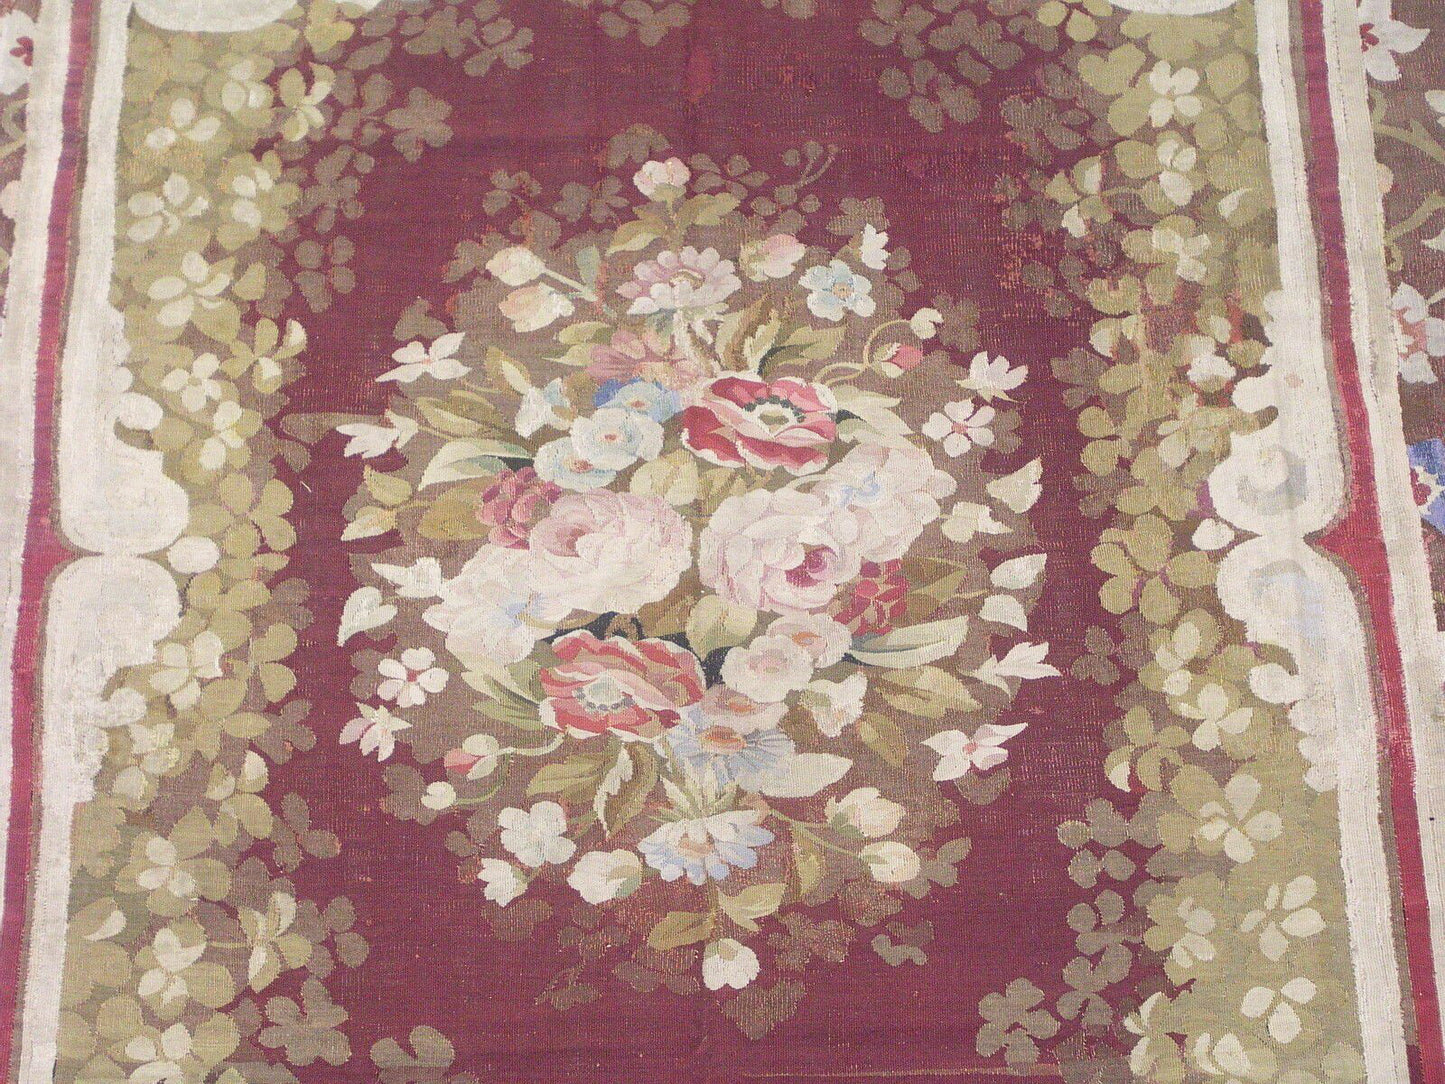 8X11 Antique French Aubusson Rug with Floral Design, circa 1880